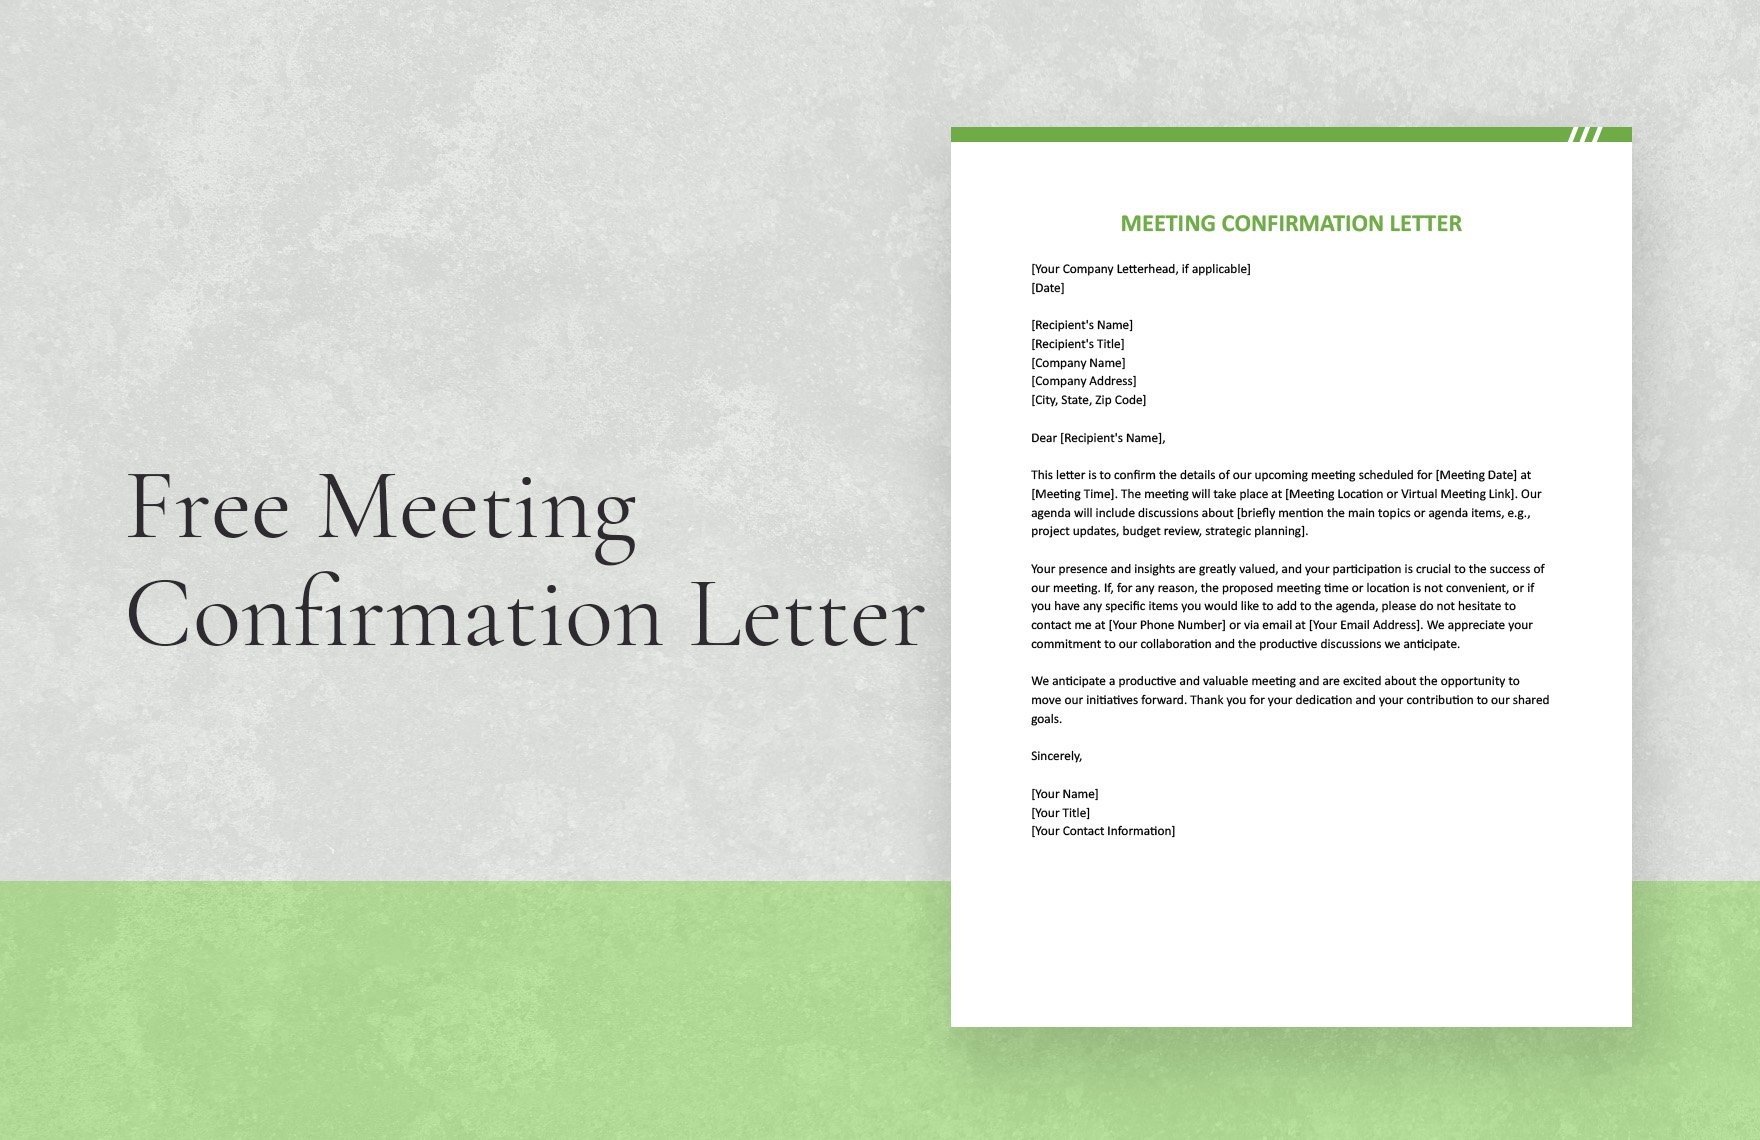 Meeting Confirmation Letter